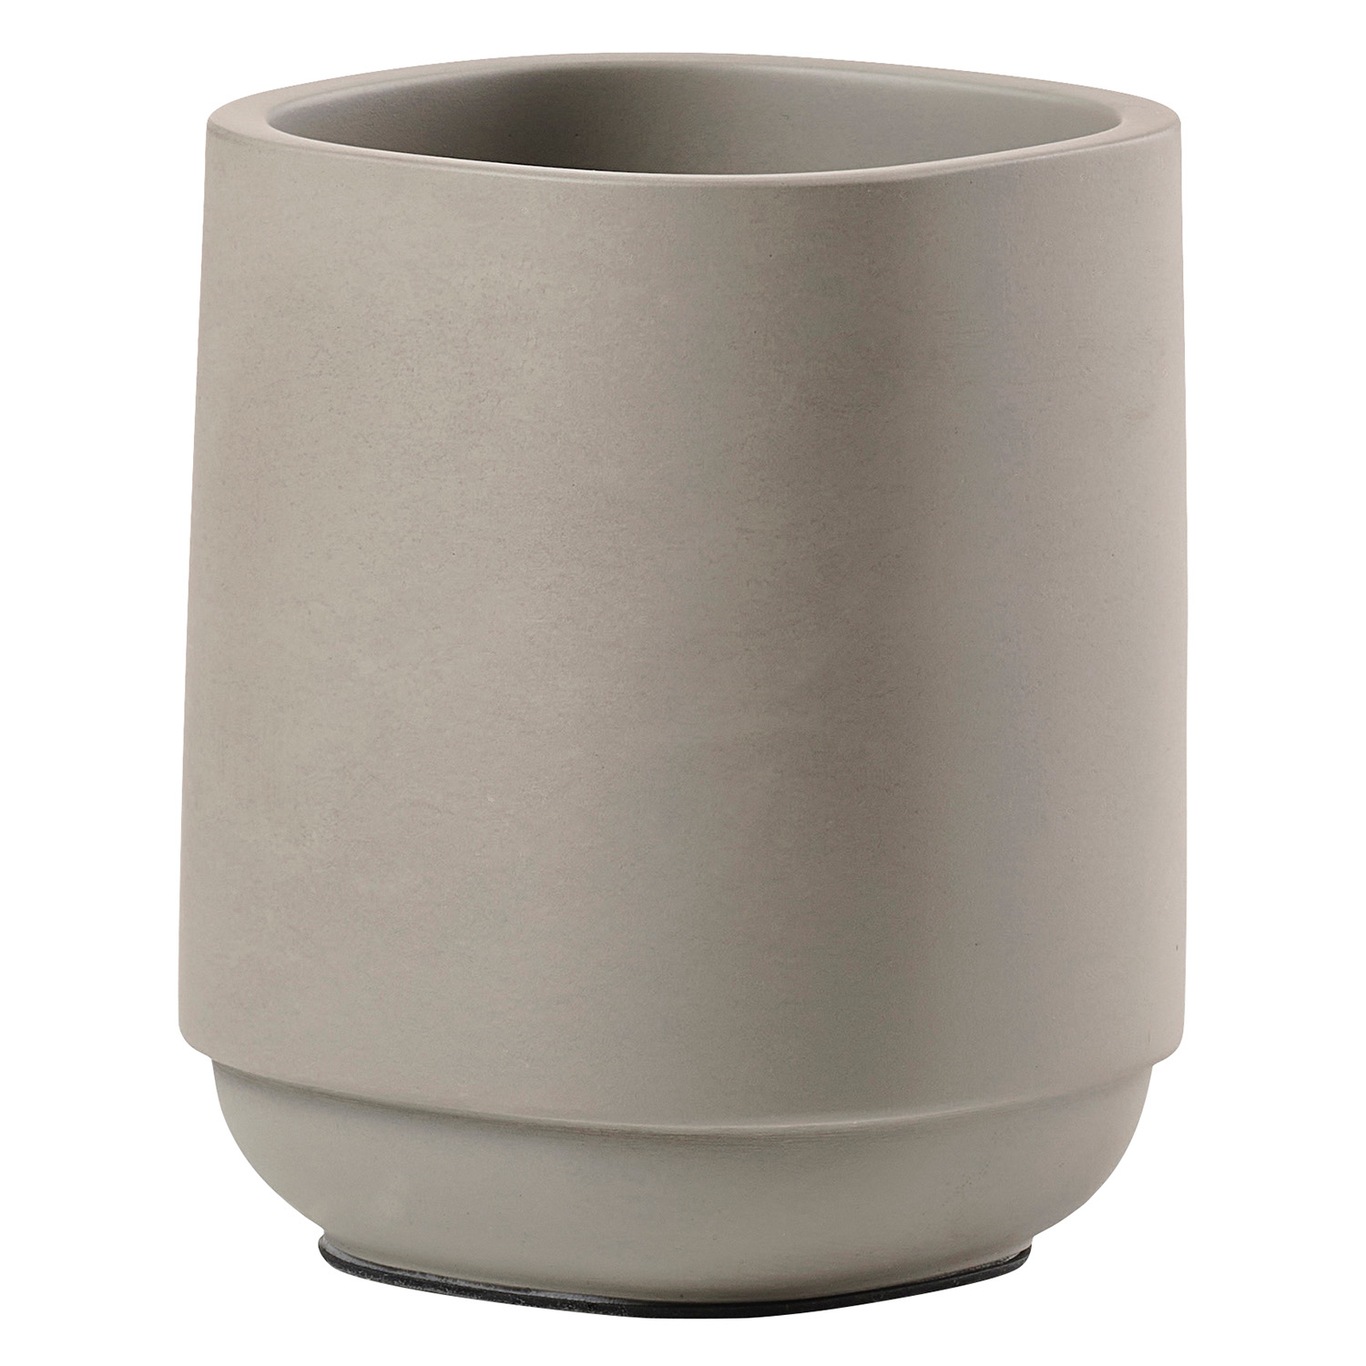 Time Toothbrush Holder, Concrete